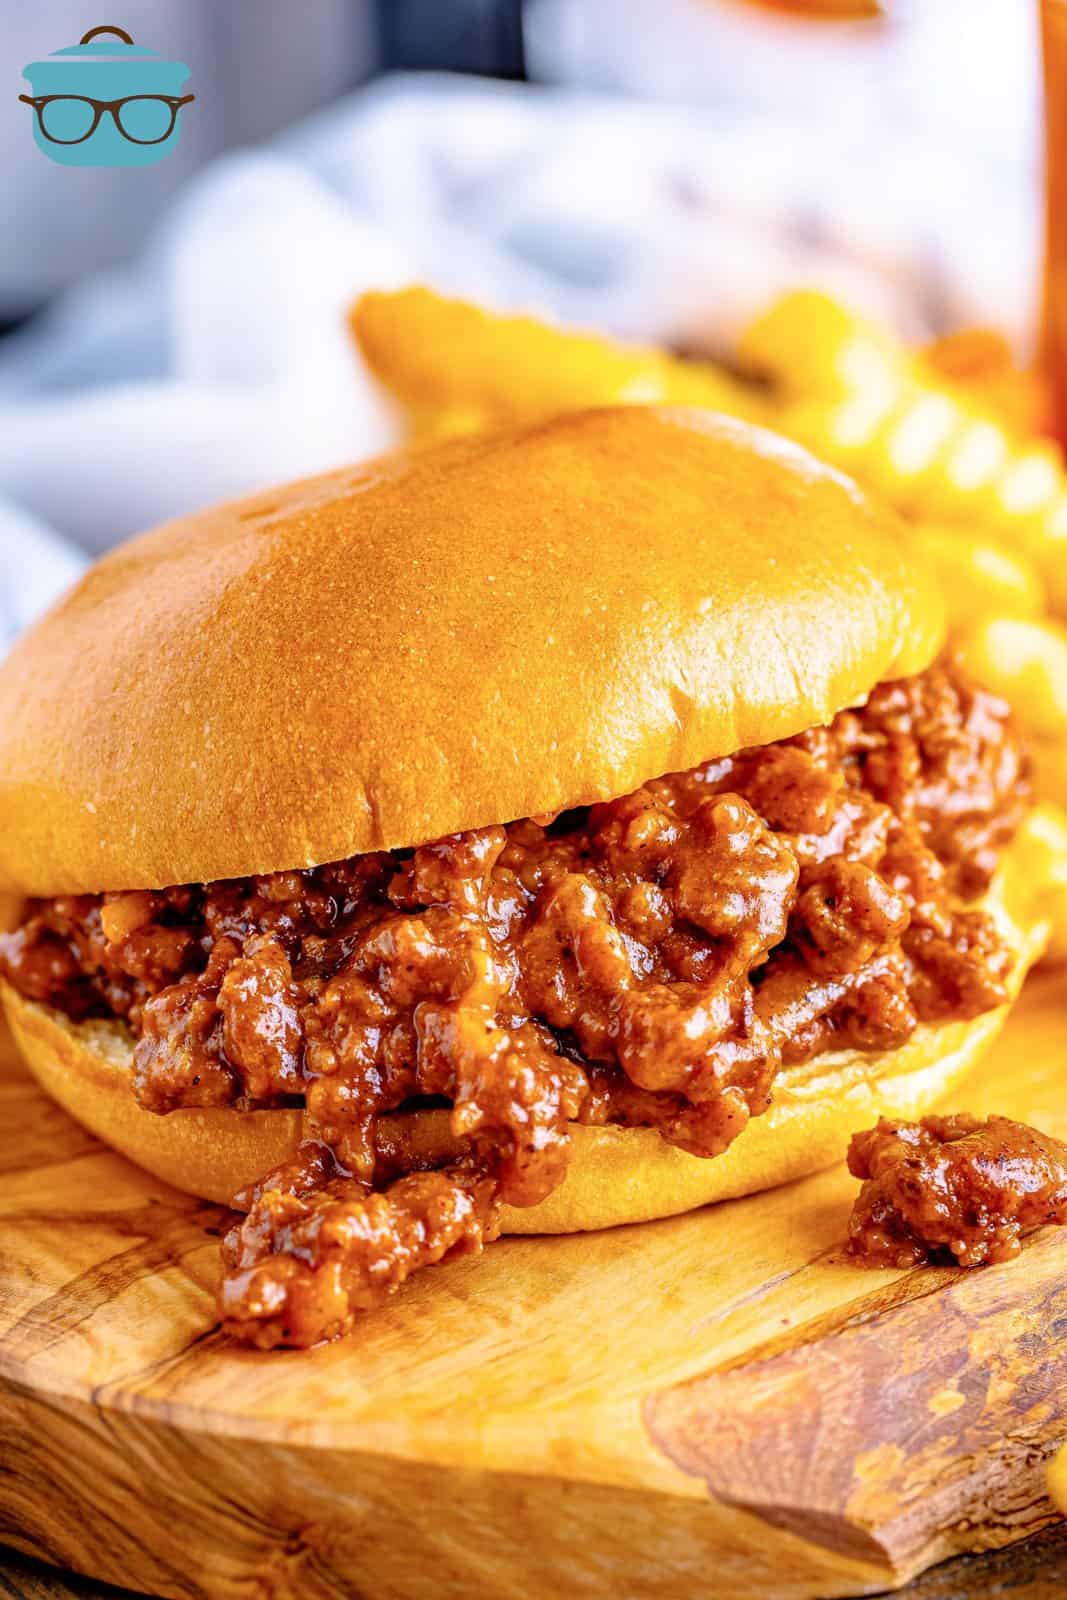 a sloppy Joe sandwich on a wood surface with French fries in the background. 